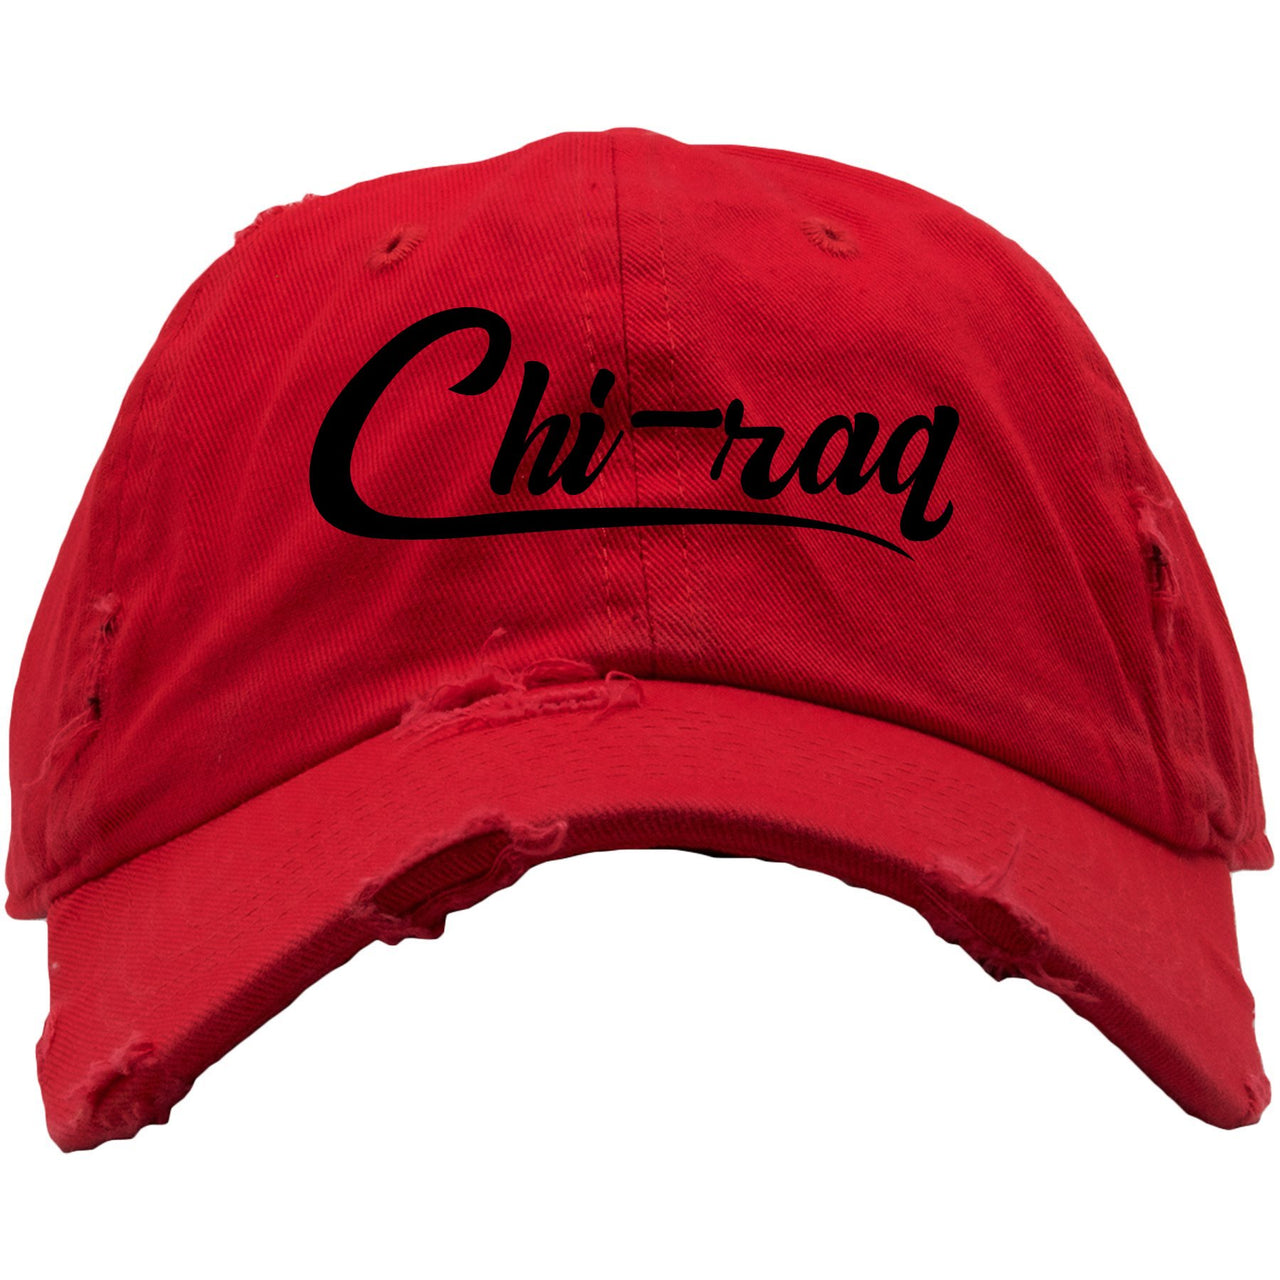 Reflections of a Champion 8s Distressed Dad Hat | Chiraq Script, Red